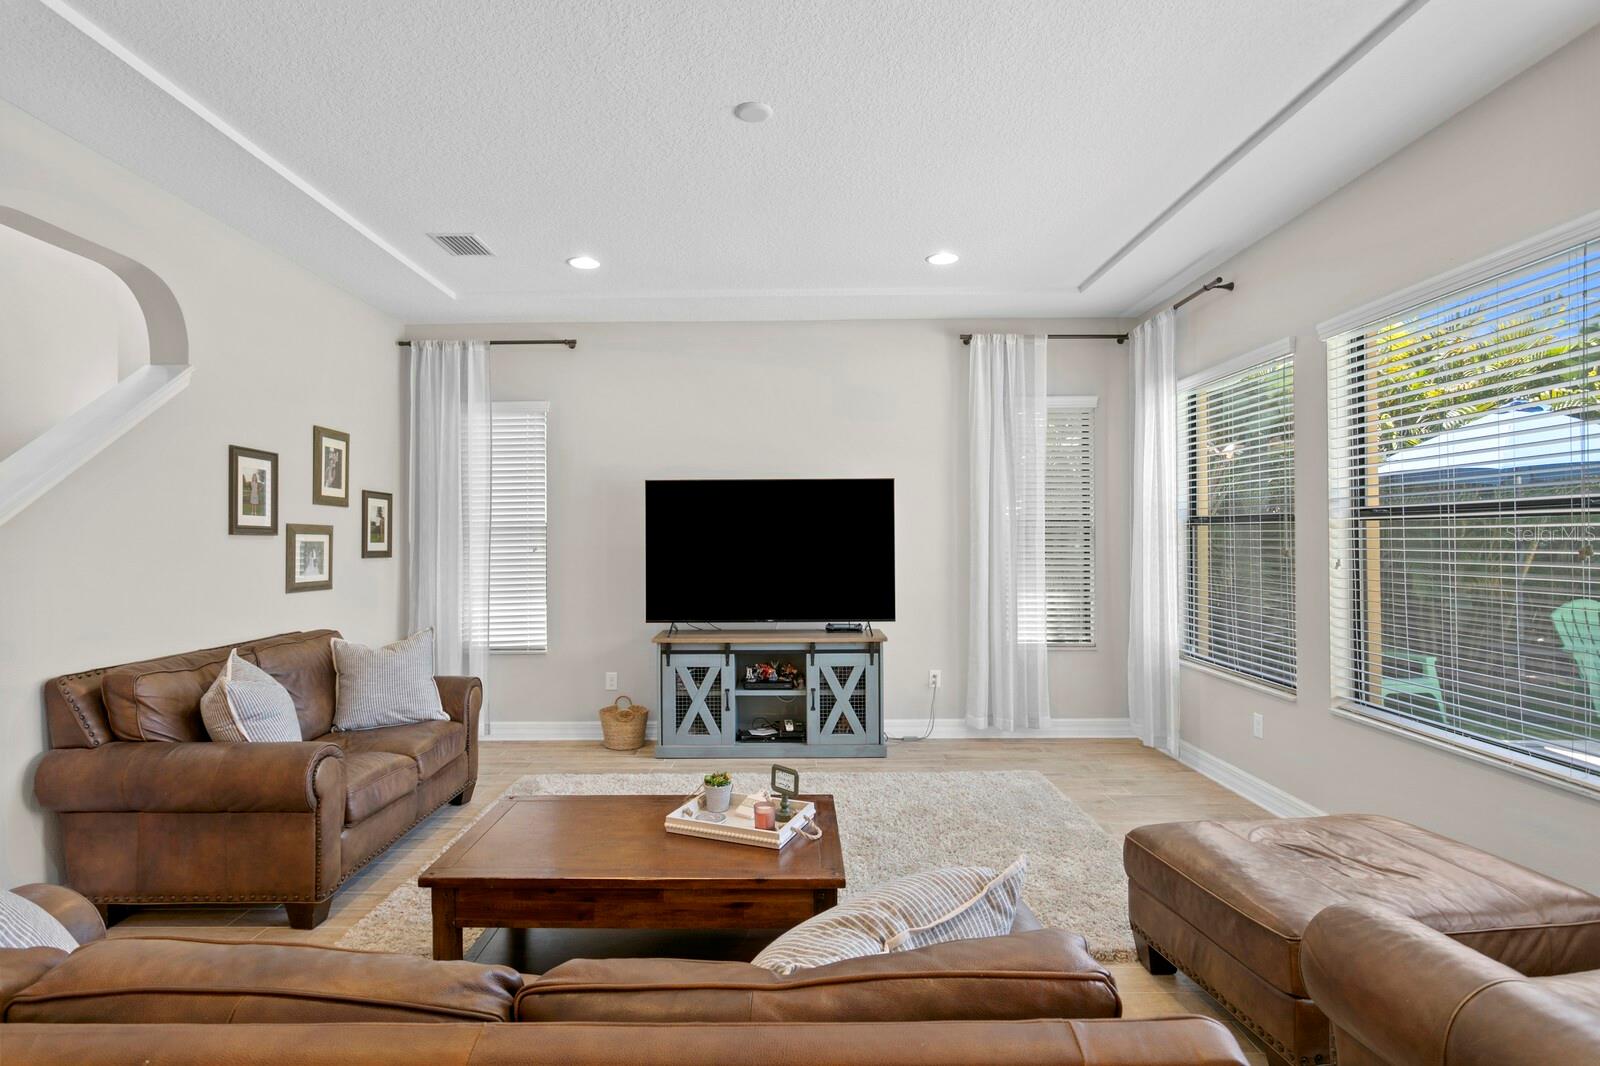 Frame this area with a tv, entertainment center, and make this space your own!